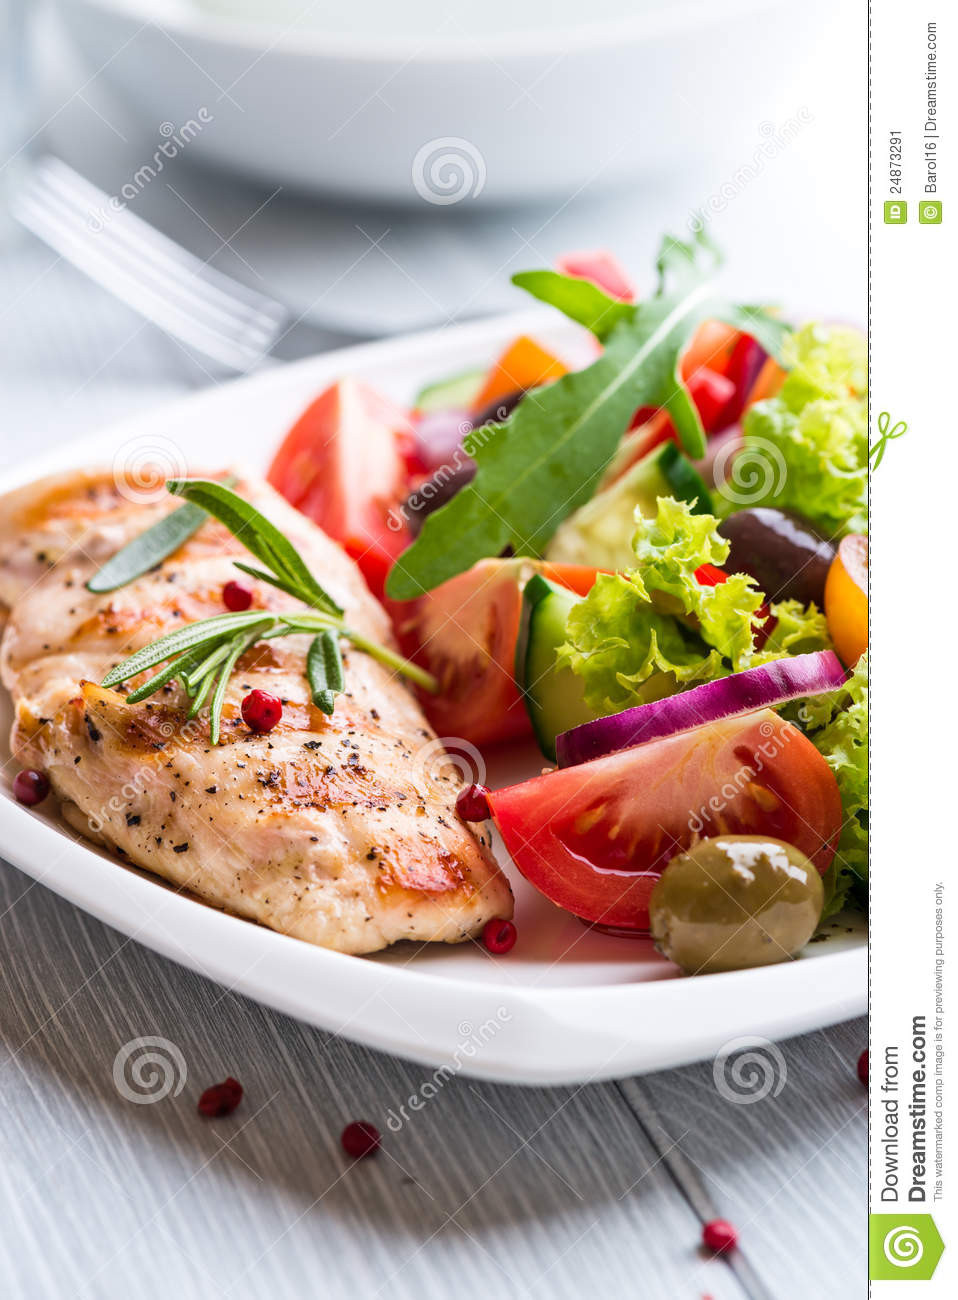 Chicken Breast For Salad
 Grilled Chicken Breast With Salad Stock Image Image